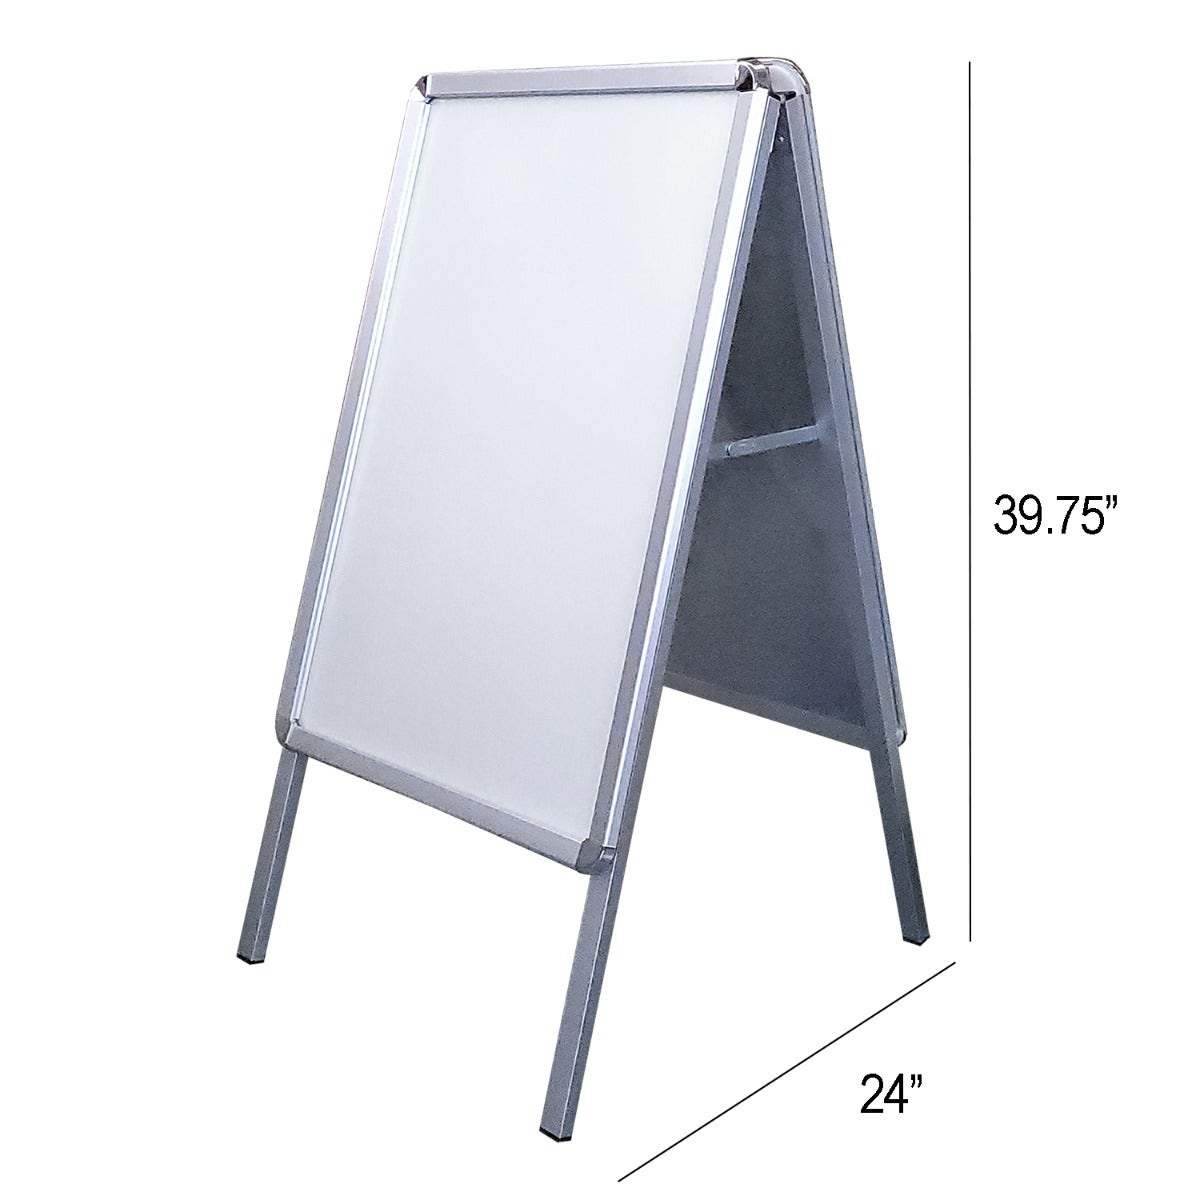 A-Frame Aluminum Whiteboard and Sign Holder - Eddie's Hang-Up Display Ltd.